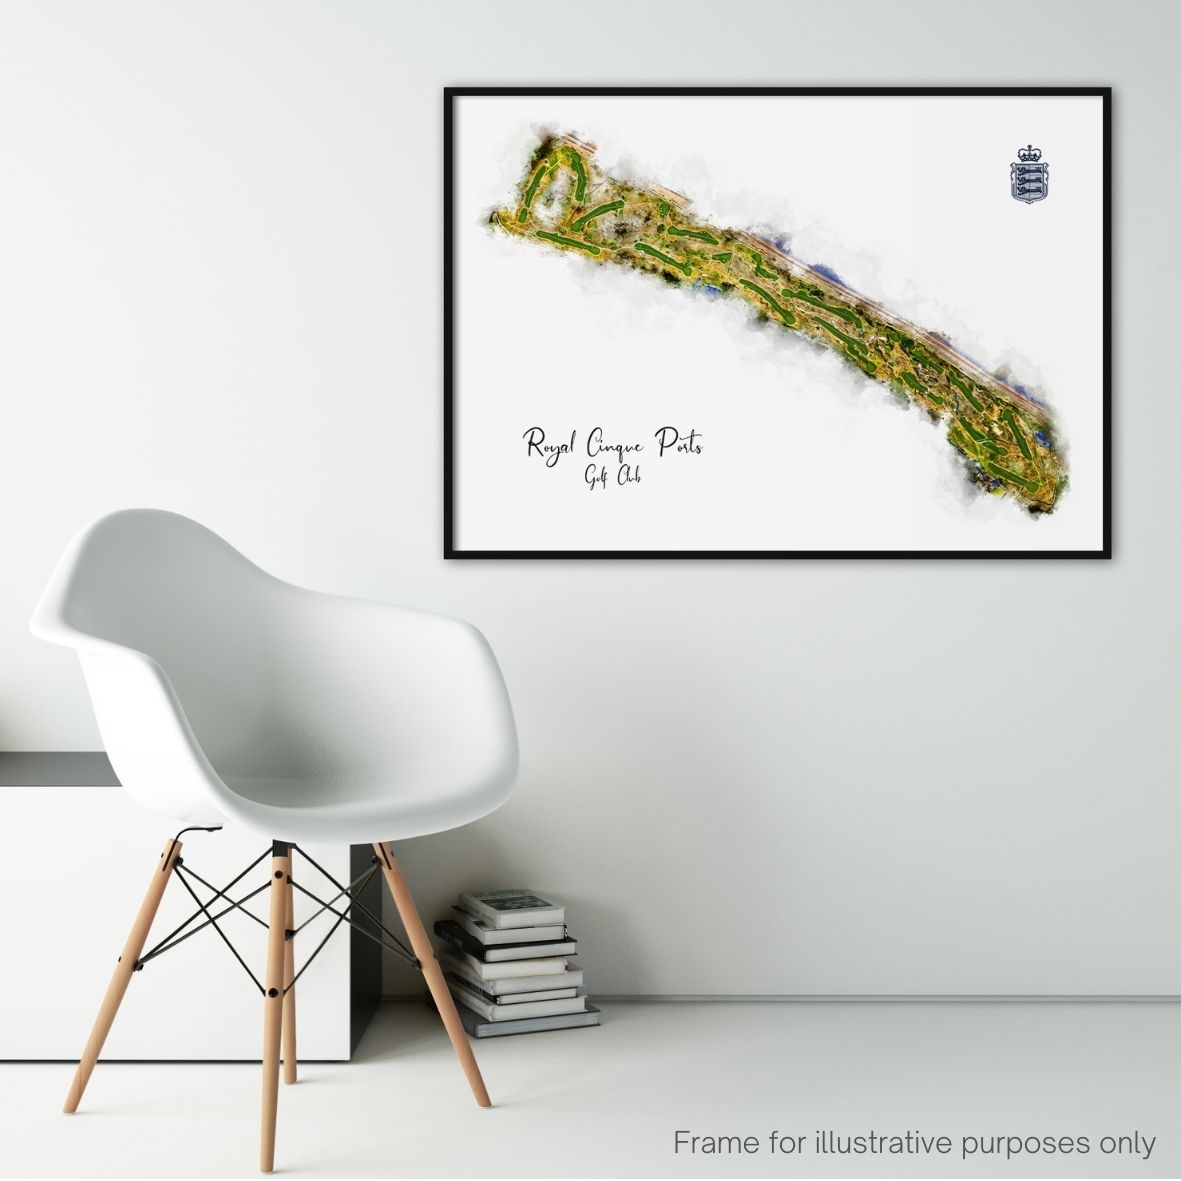 Large framed print of Royal Cinque ports golf club from Evalu18